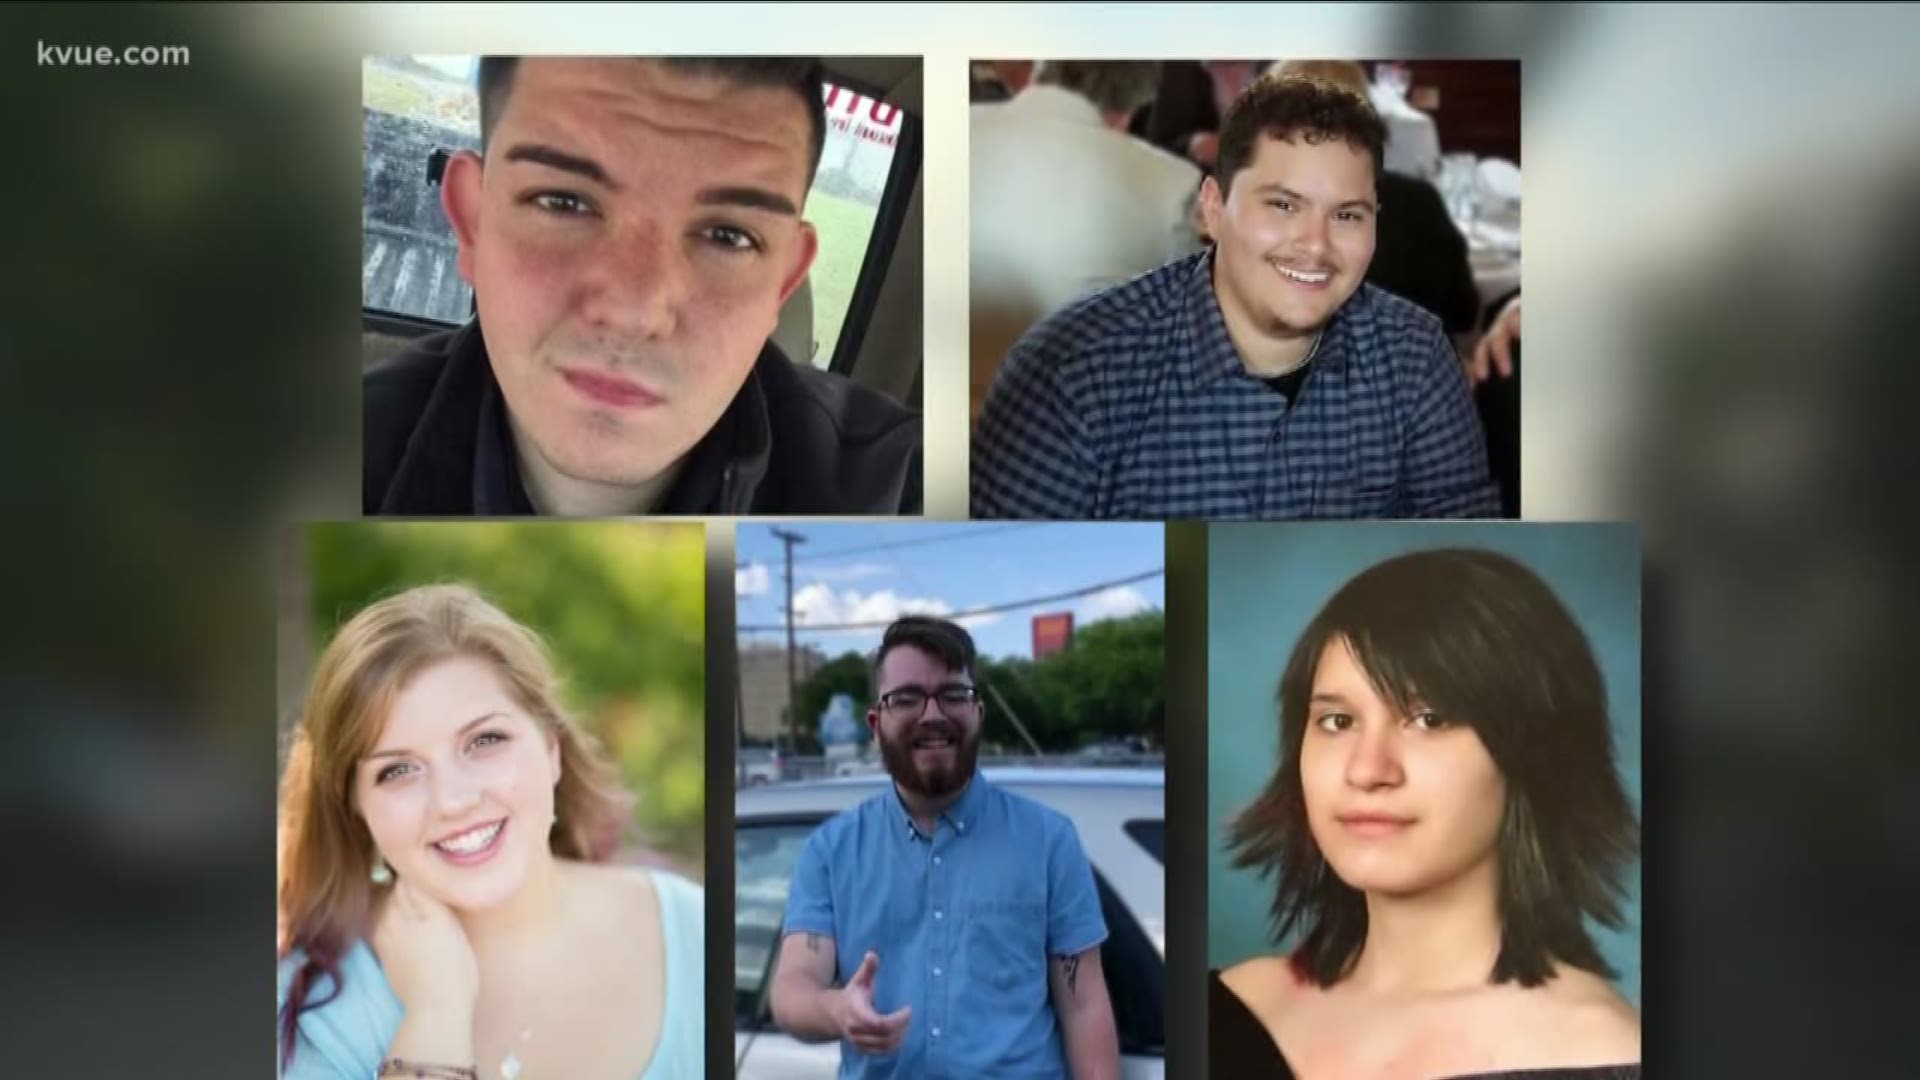 The five deaths in this summer's tragic San Marcos apartment fire have been ruled homicides.